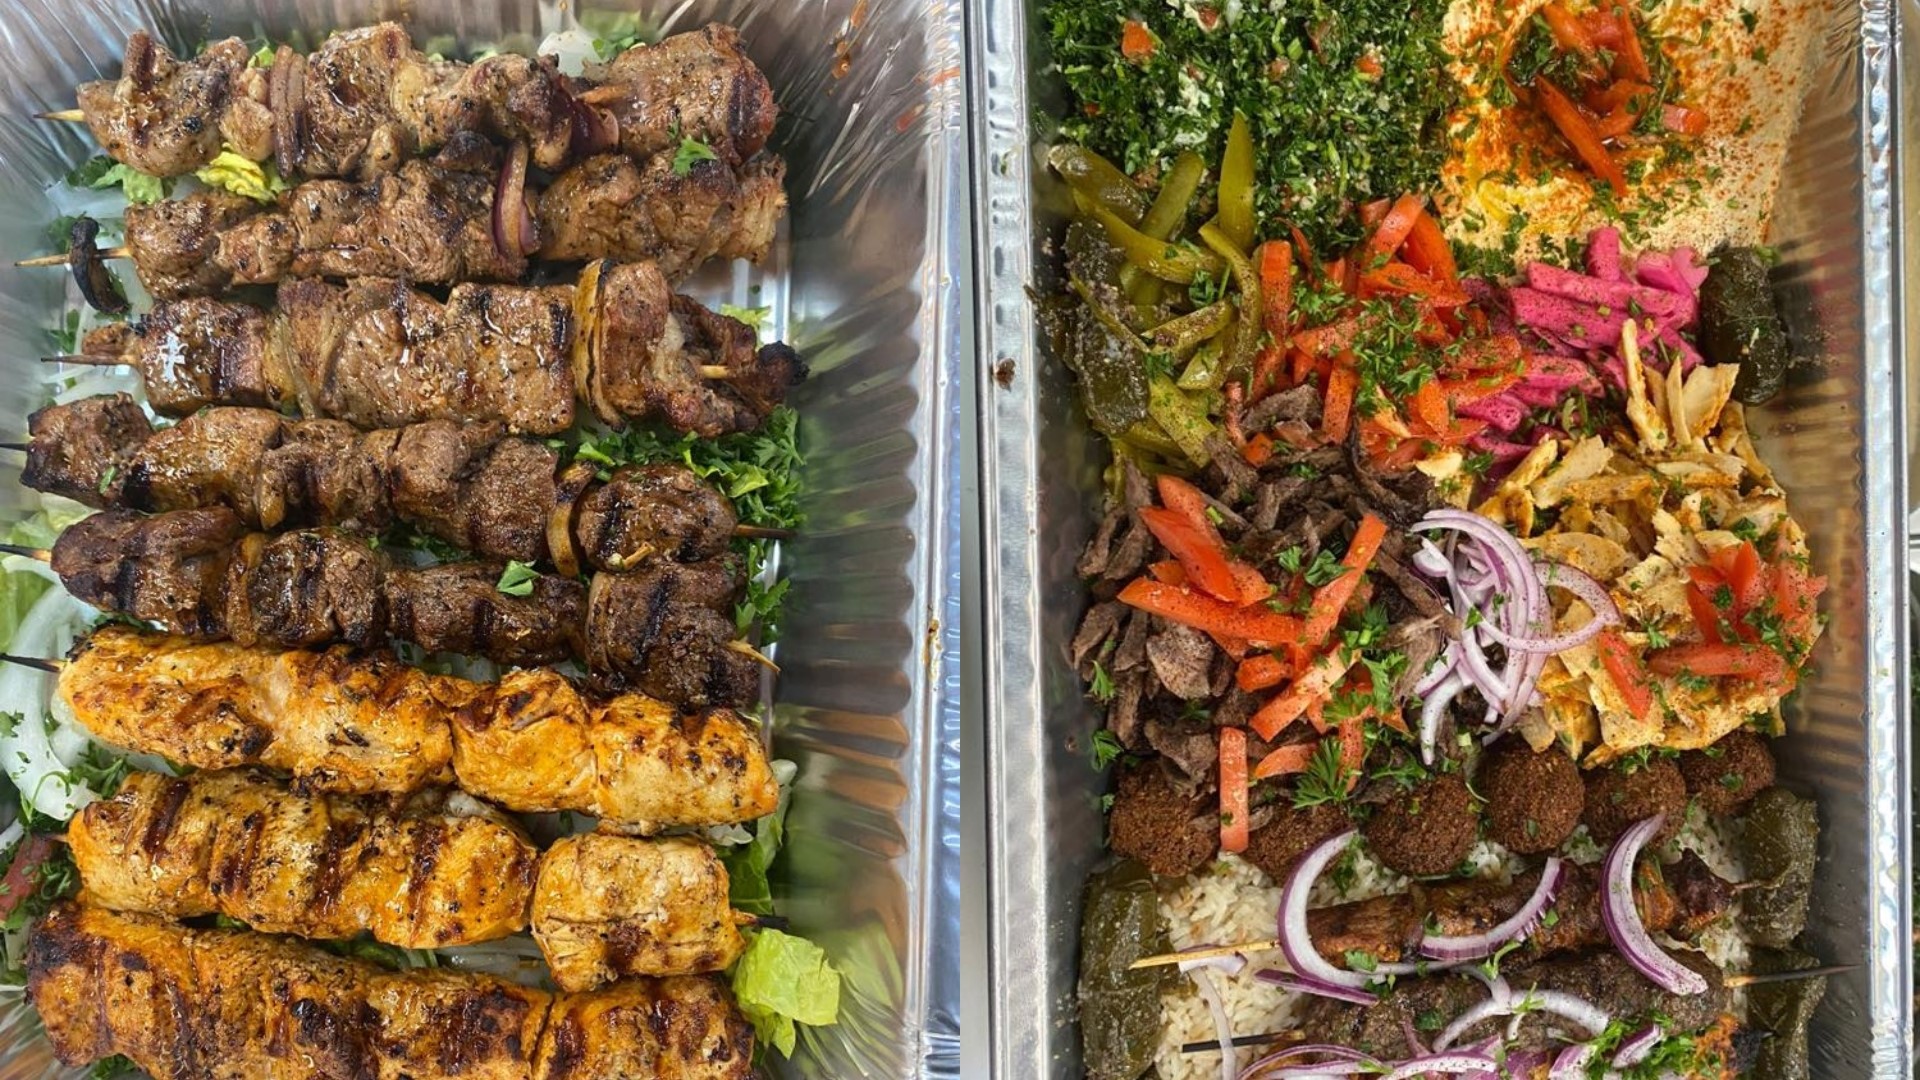 Wrap & Kebab will have a hookah café, an international market, and a restaurant where they'll cook and chop shawarma in front of you